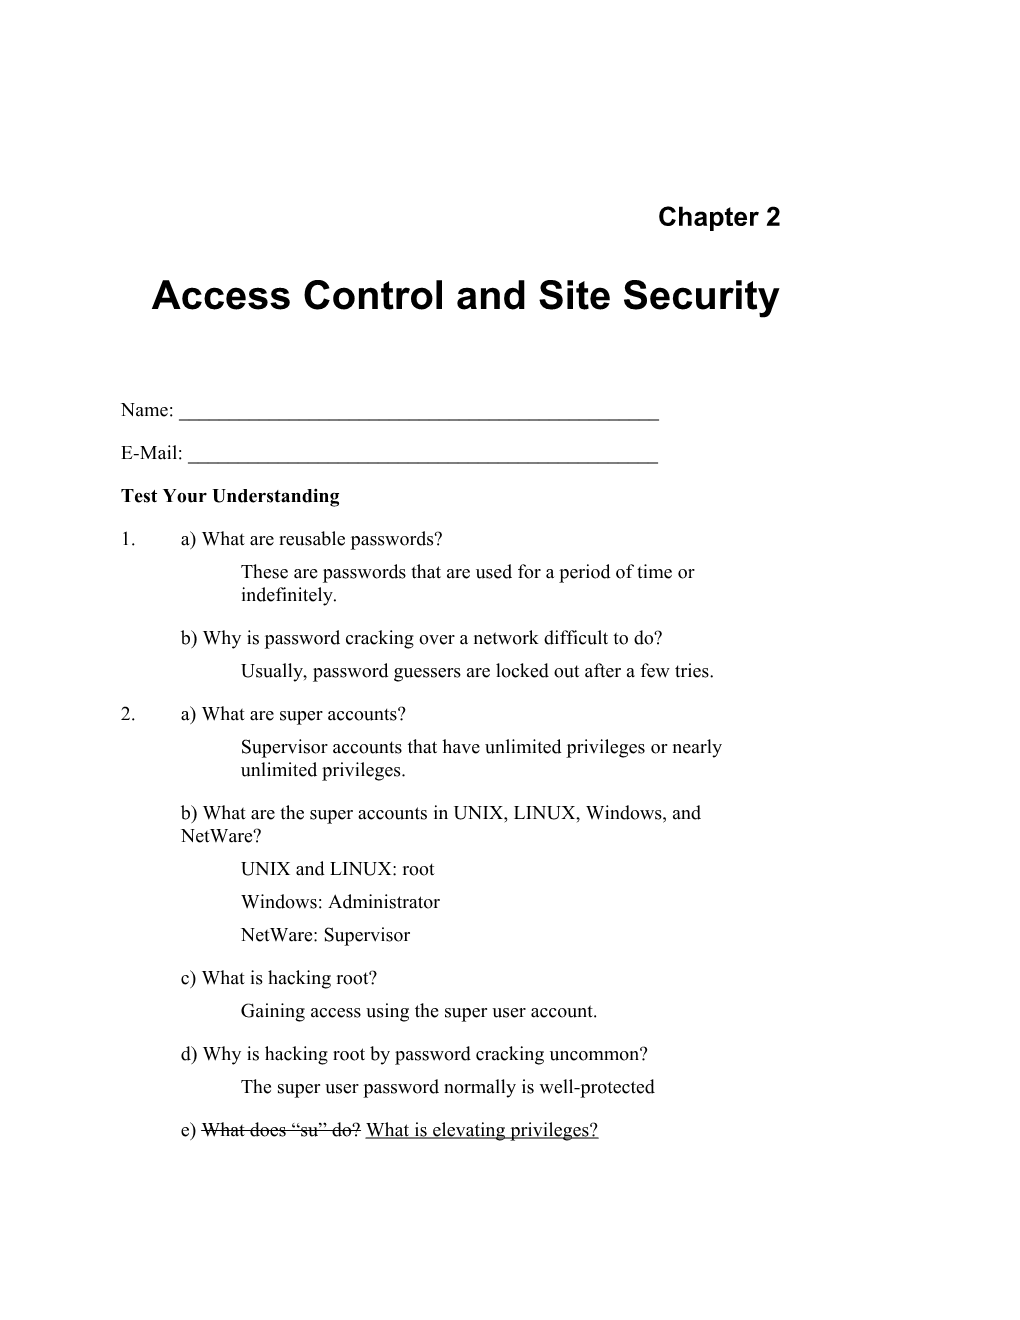 Access Control and Site Security